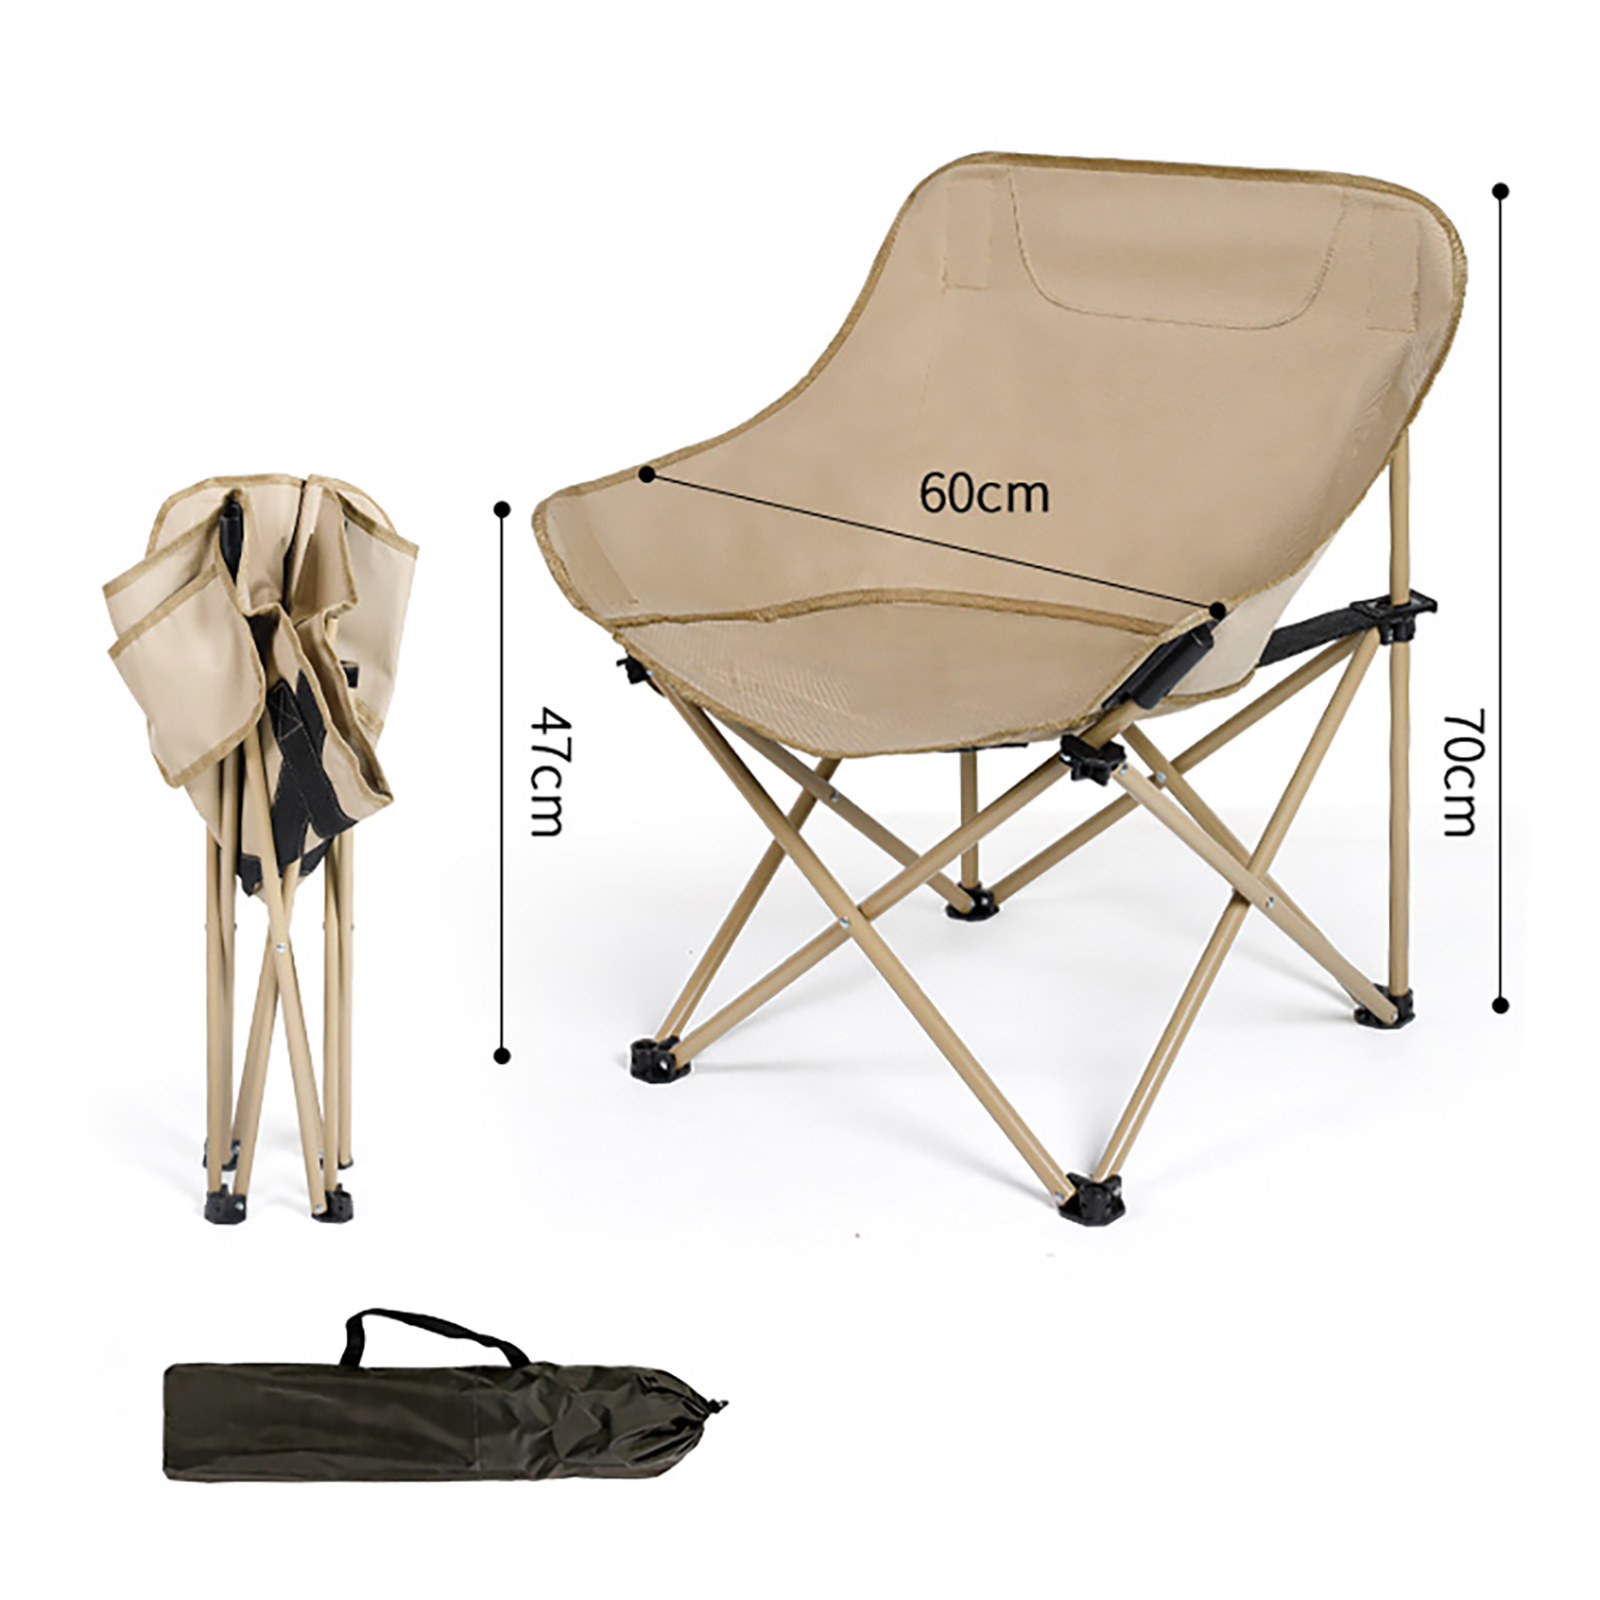 Camping Chairs Lawn Chairs Portable Chair Support 150kg Foldable Chair Backpacking Chair 600D Oxford Cloth + Aluminum Alloy